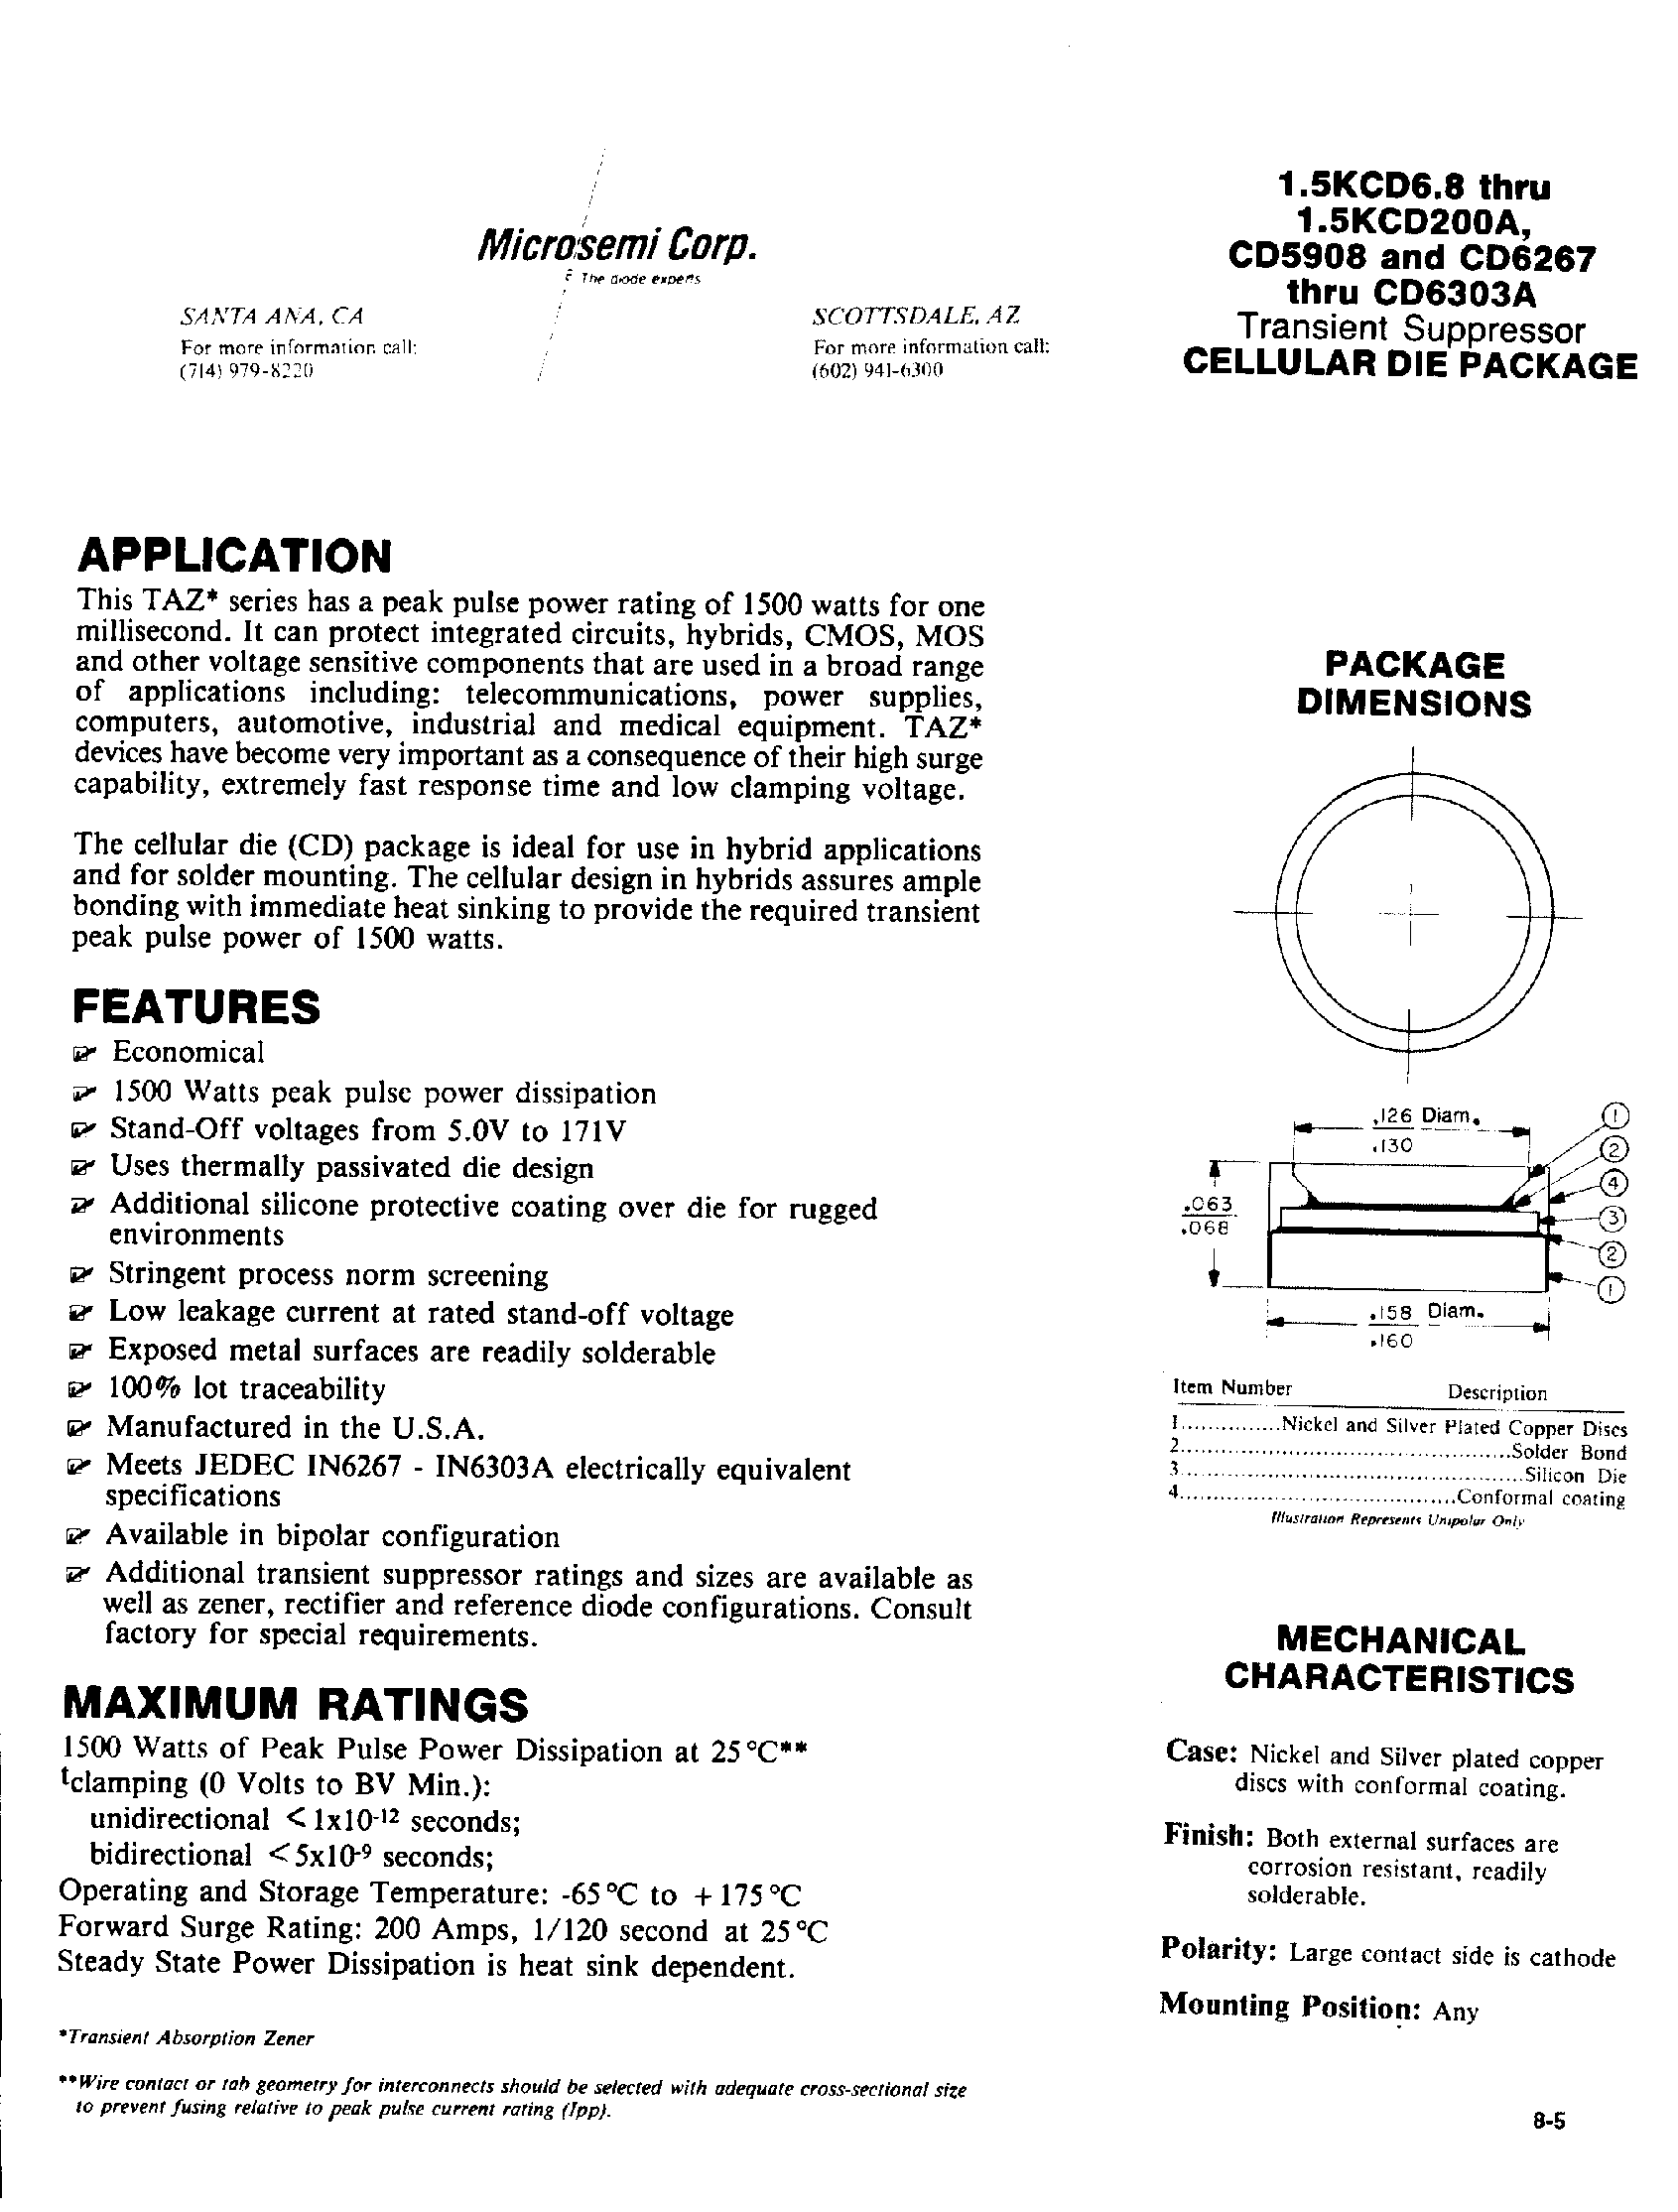 Datasheet CD6292A - Transient suppressor CELLULAR DIE PACKAGE page 1